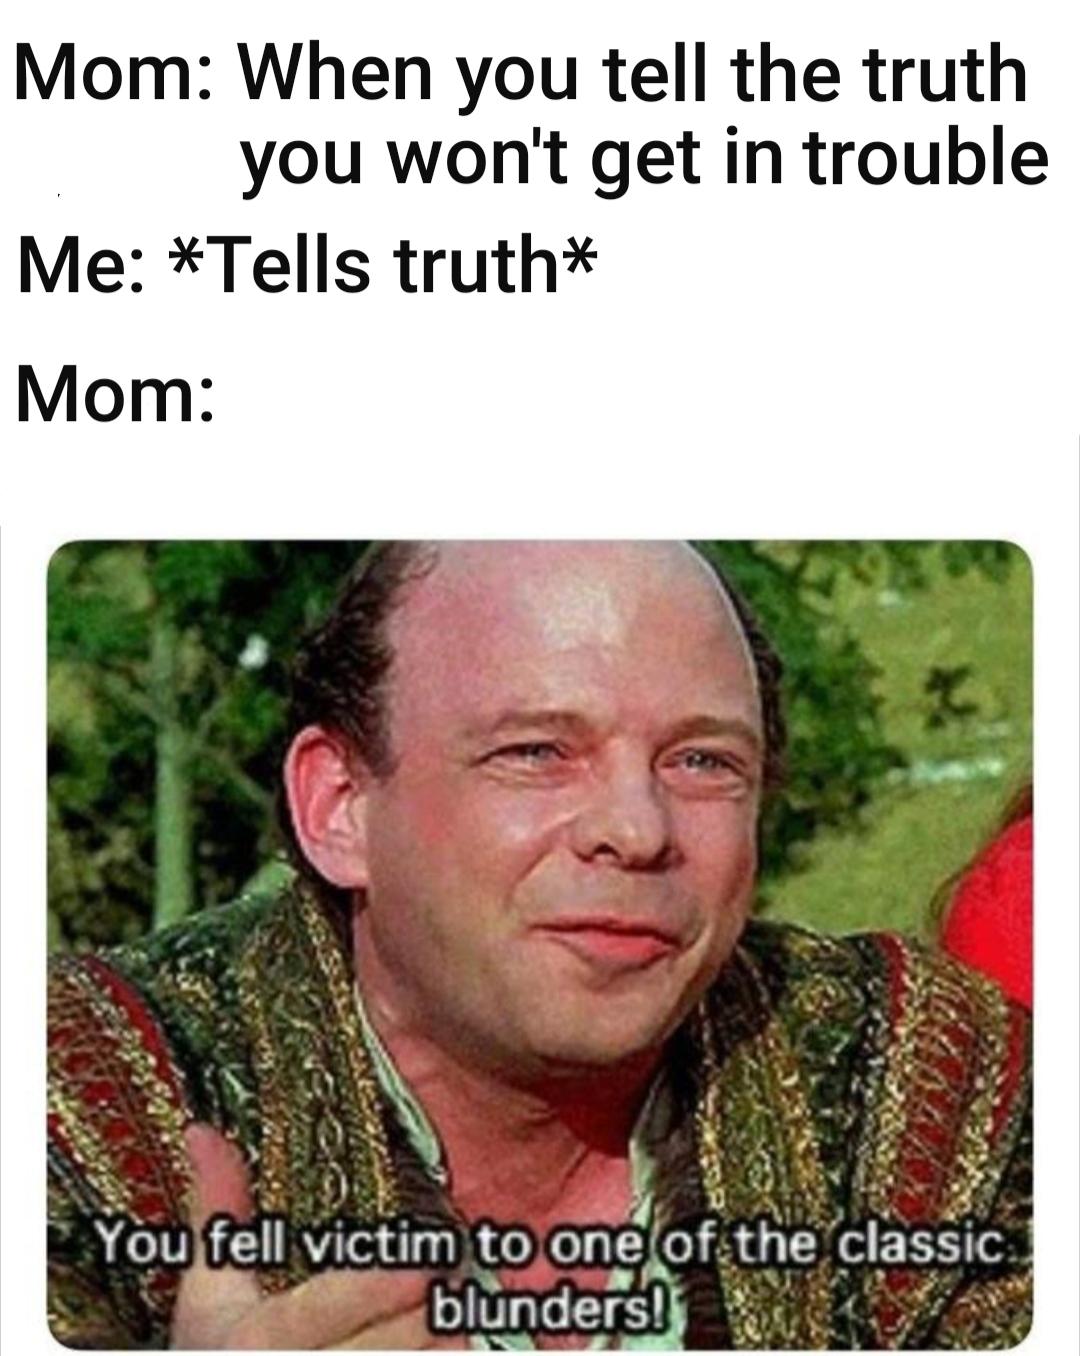 you fell victim to one of the classic blunders - Mom When you tell the truth you won't get in trouble Me Tells truth Mom You fell victim to one of the classic blunders!